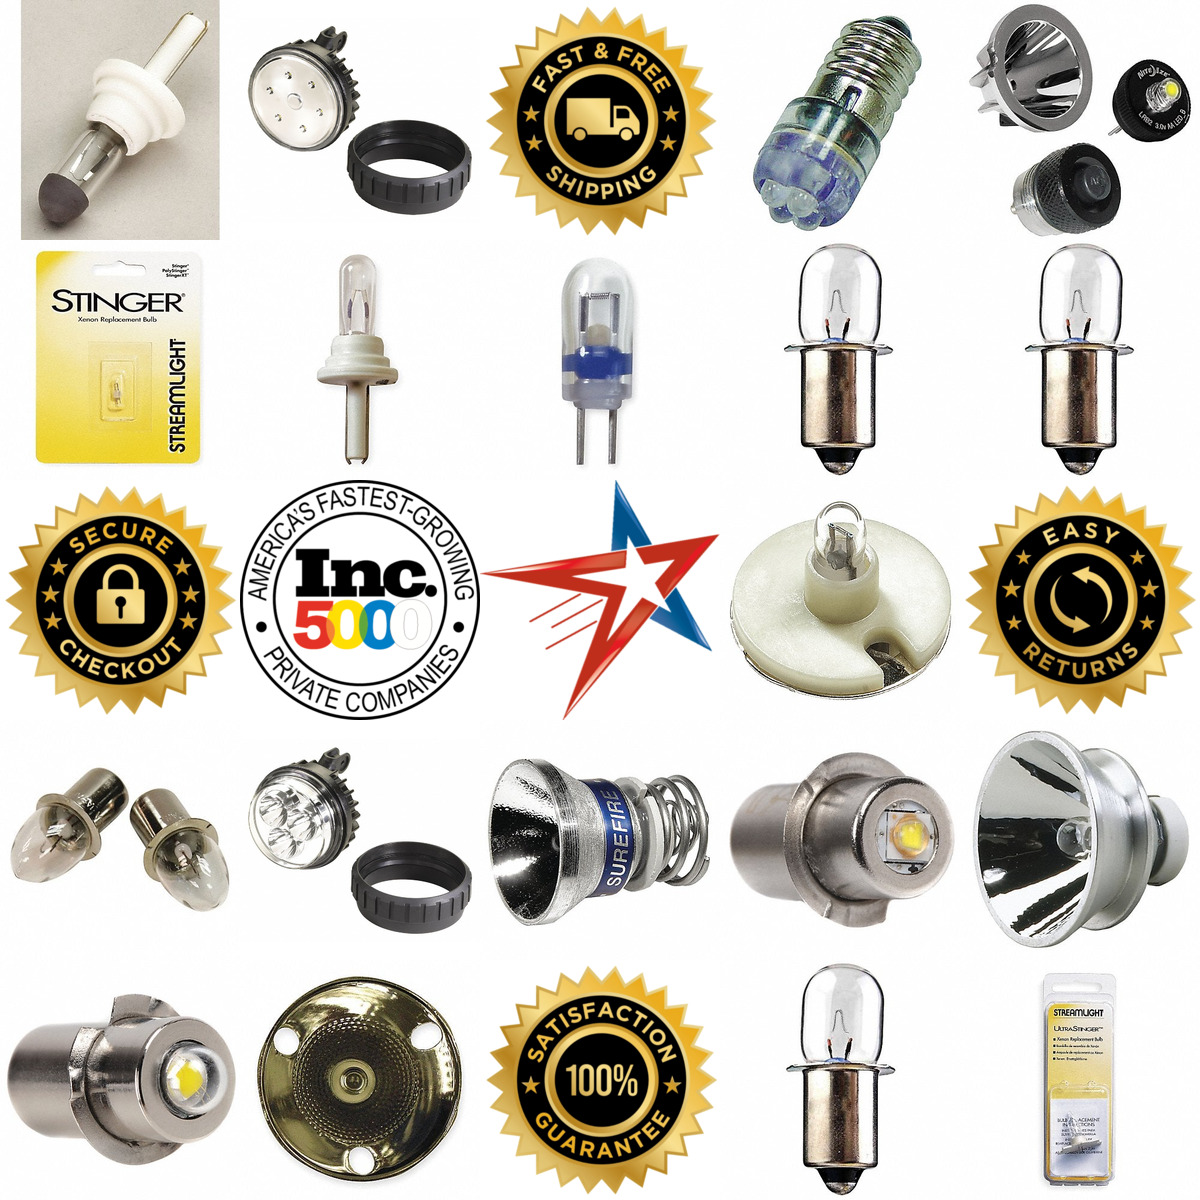 A selection of Flashlight Bulbs and Lamp Kits products on GoVets